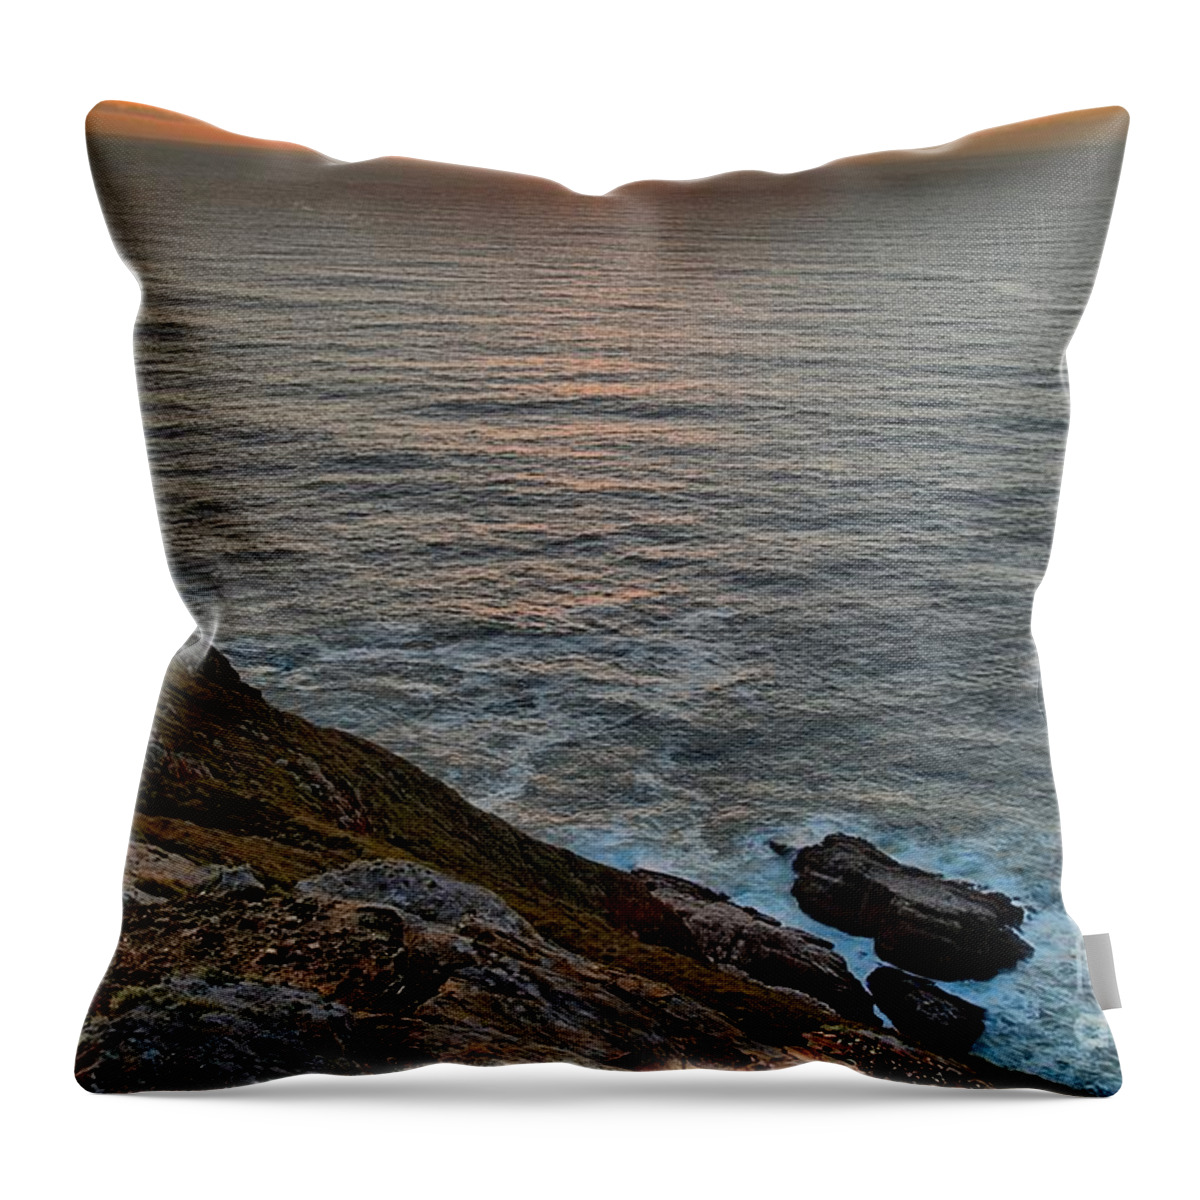 Point Reyes National Seashore Throw Pillow featuring the photograph Point Reyes Lighthouse Sunset by Adam Jewell